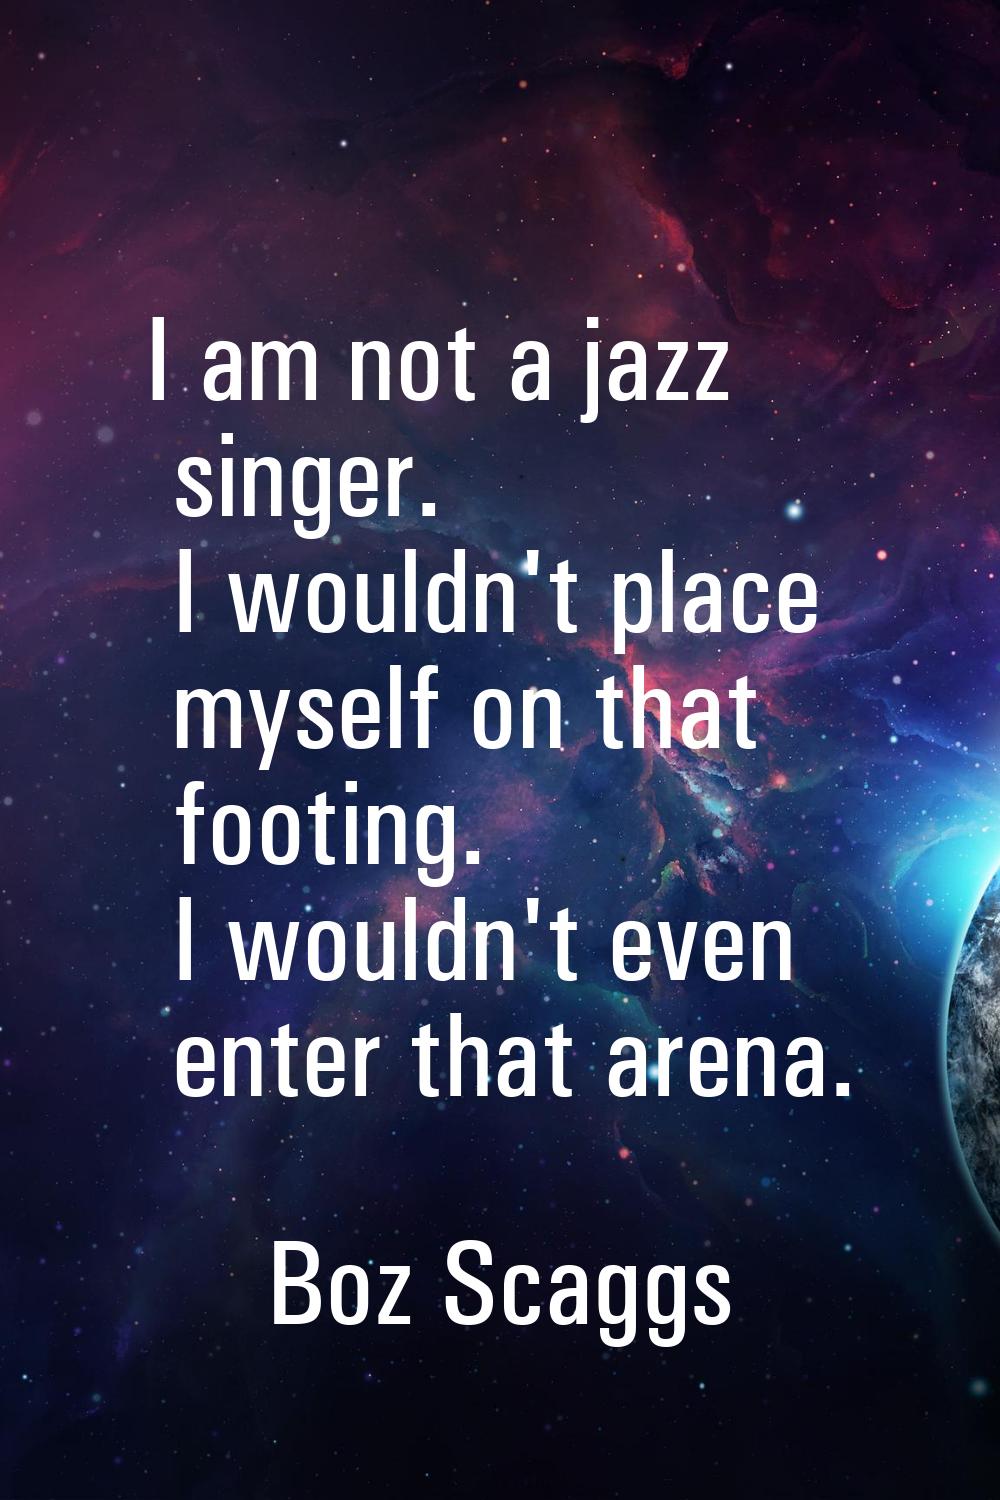 I am not a jazz singer. I wouldn't place myself on that footing. I wouldn't even enter that arena.